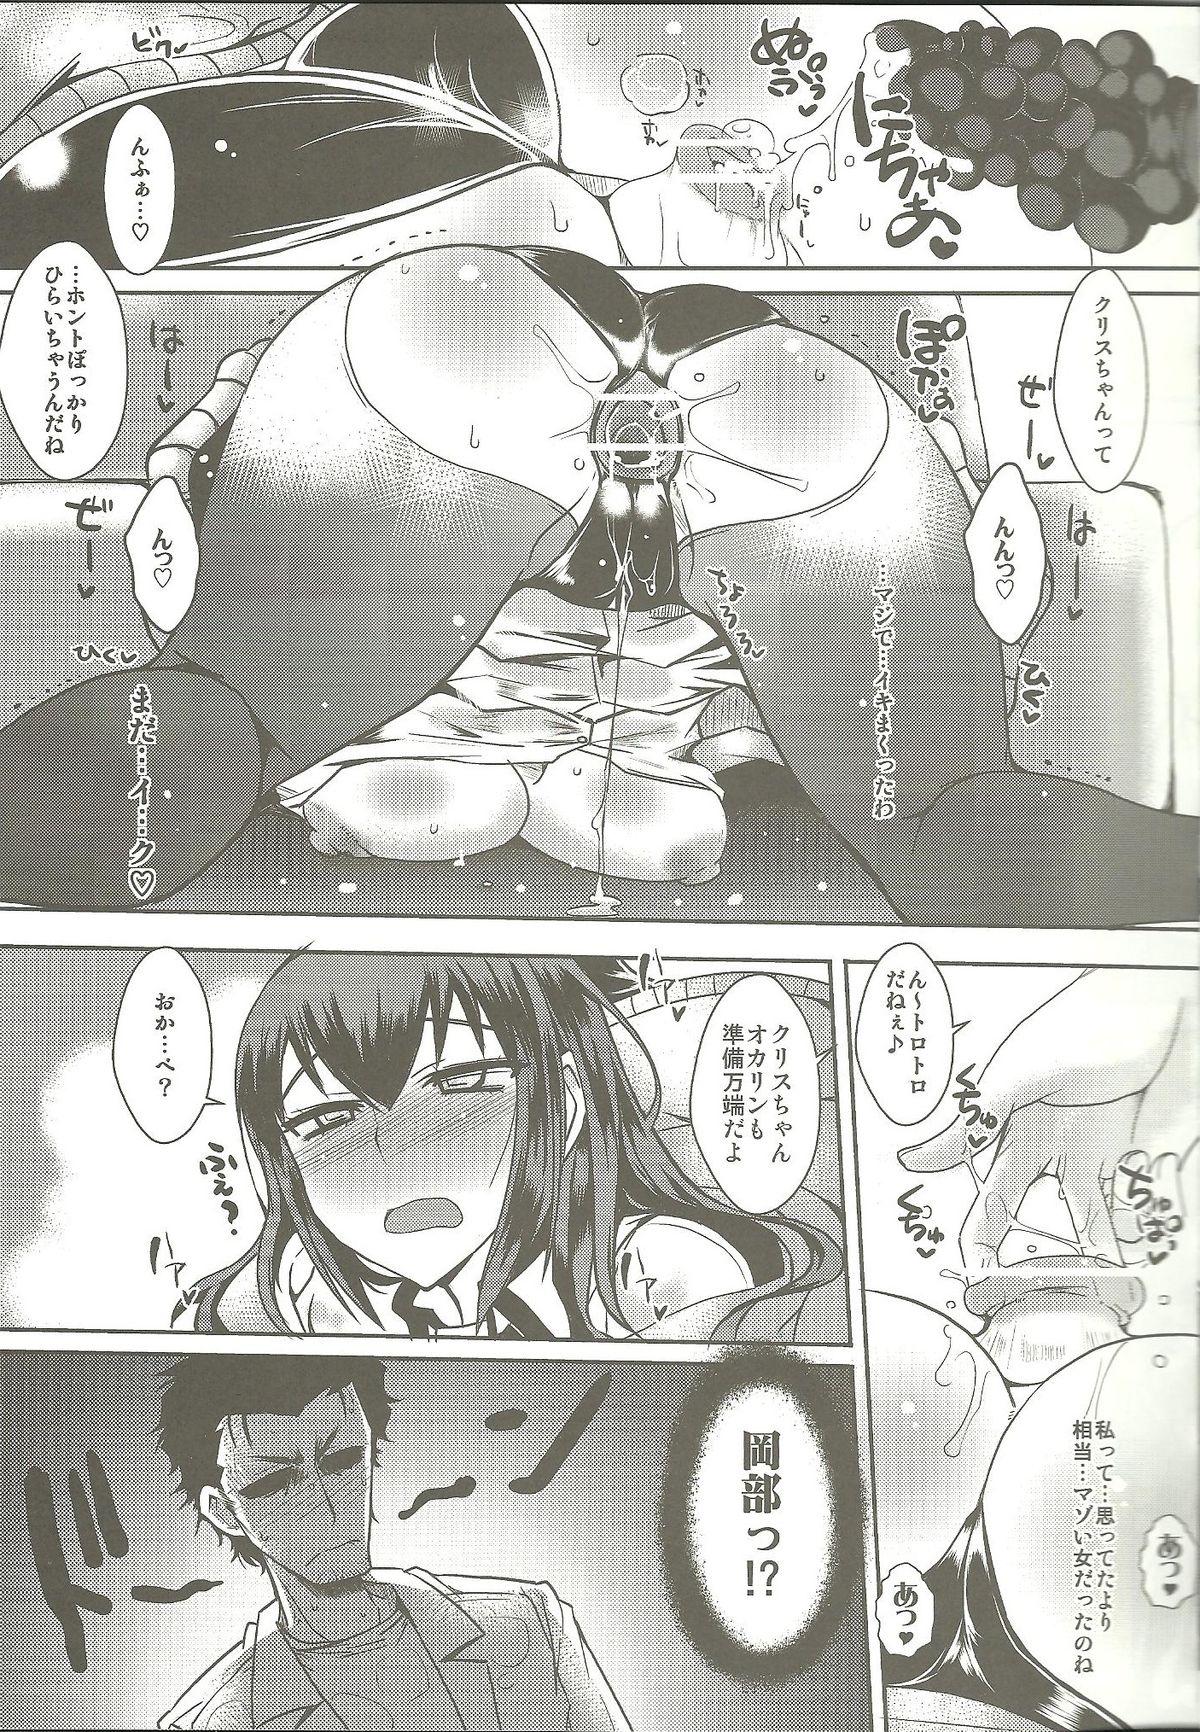 Strapon Shirikan Aikou no Sodominists - Steinsgate Pussy Play - Page 8